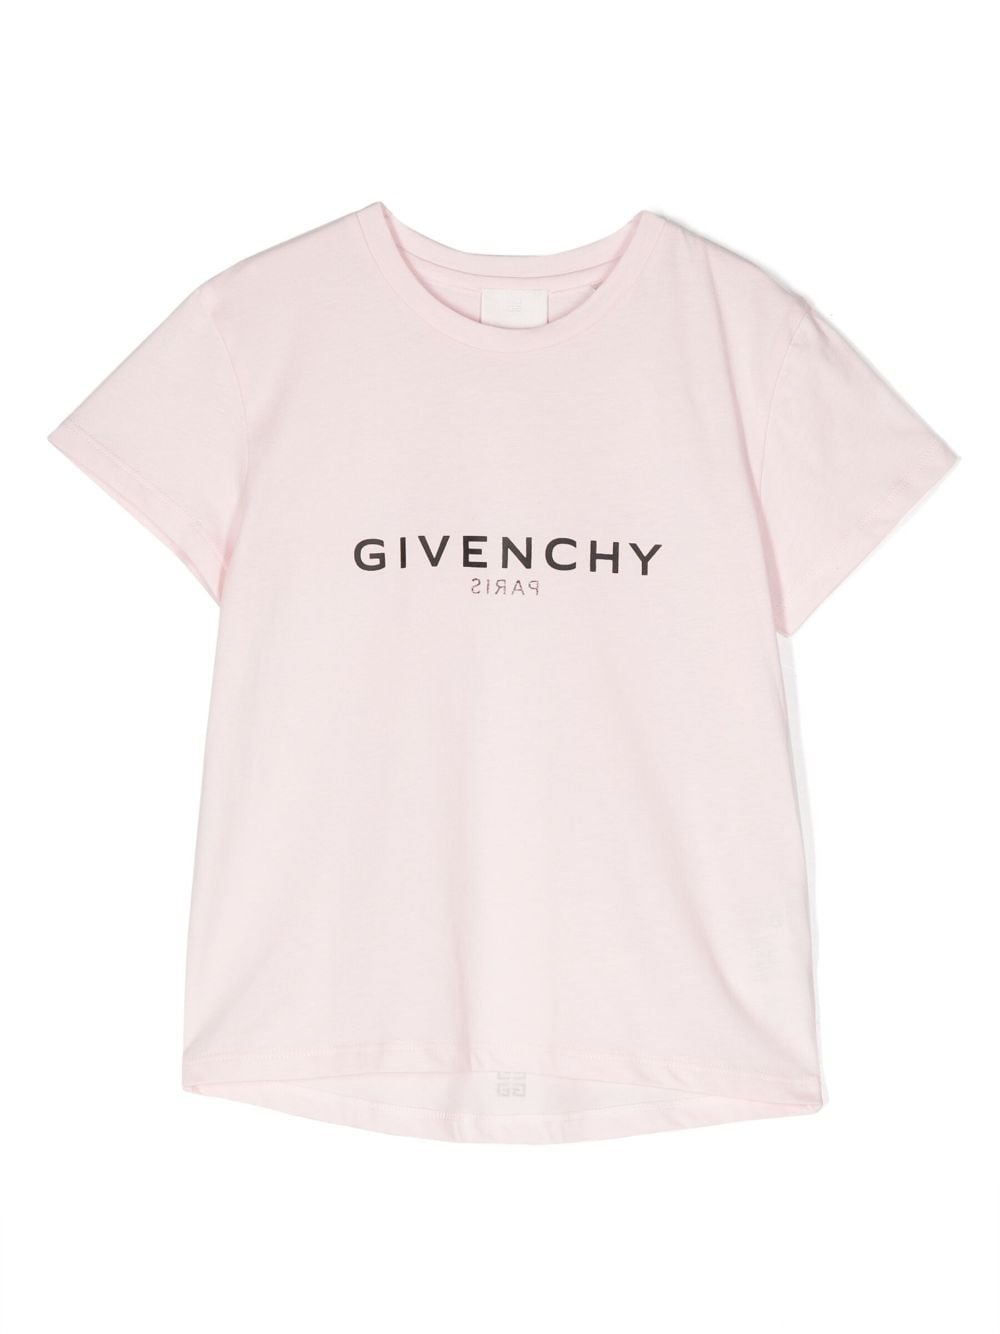 Pink cotton jersey girl GIVENCHY t-shirt